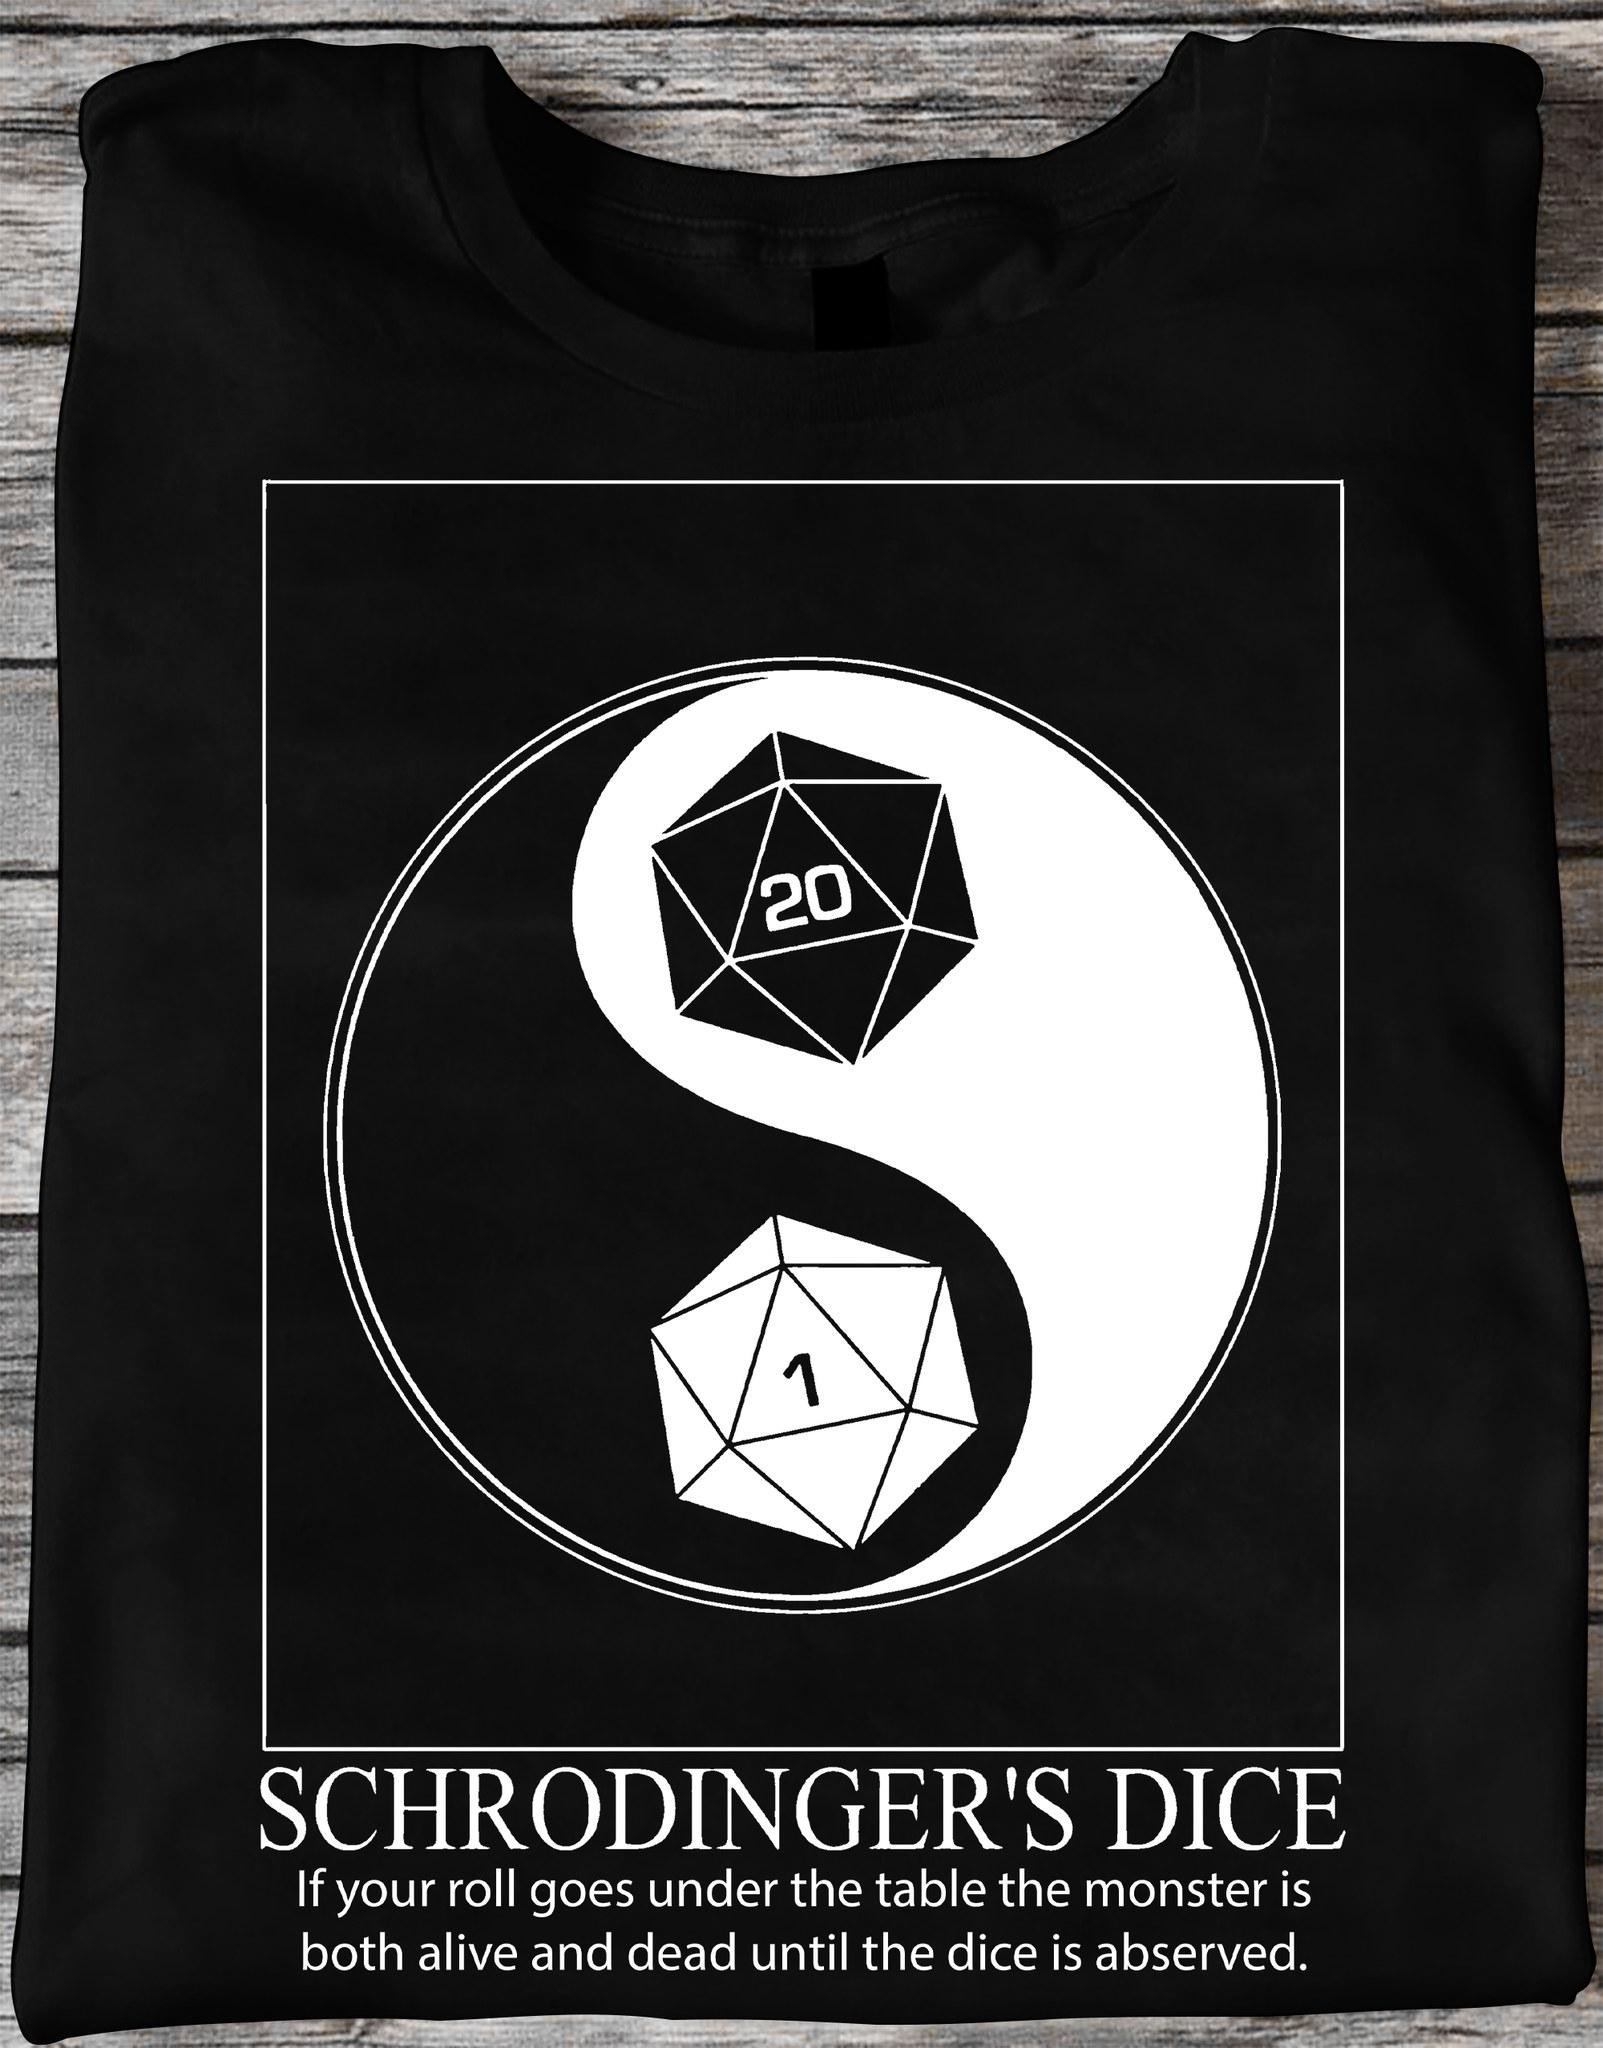 Schrodinger's dice - Dungeons and Dragons, Ying and Yang cycle